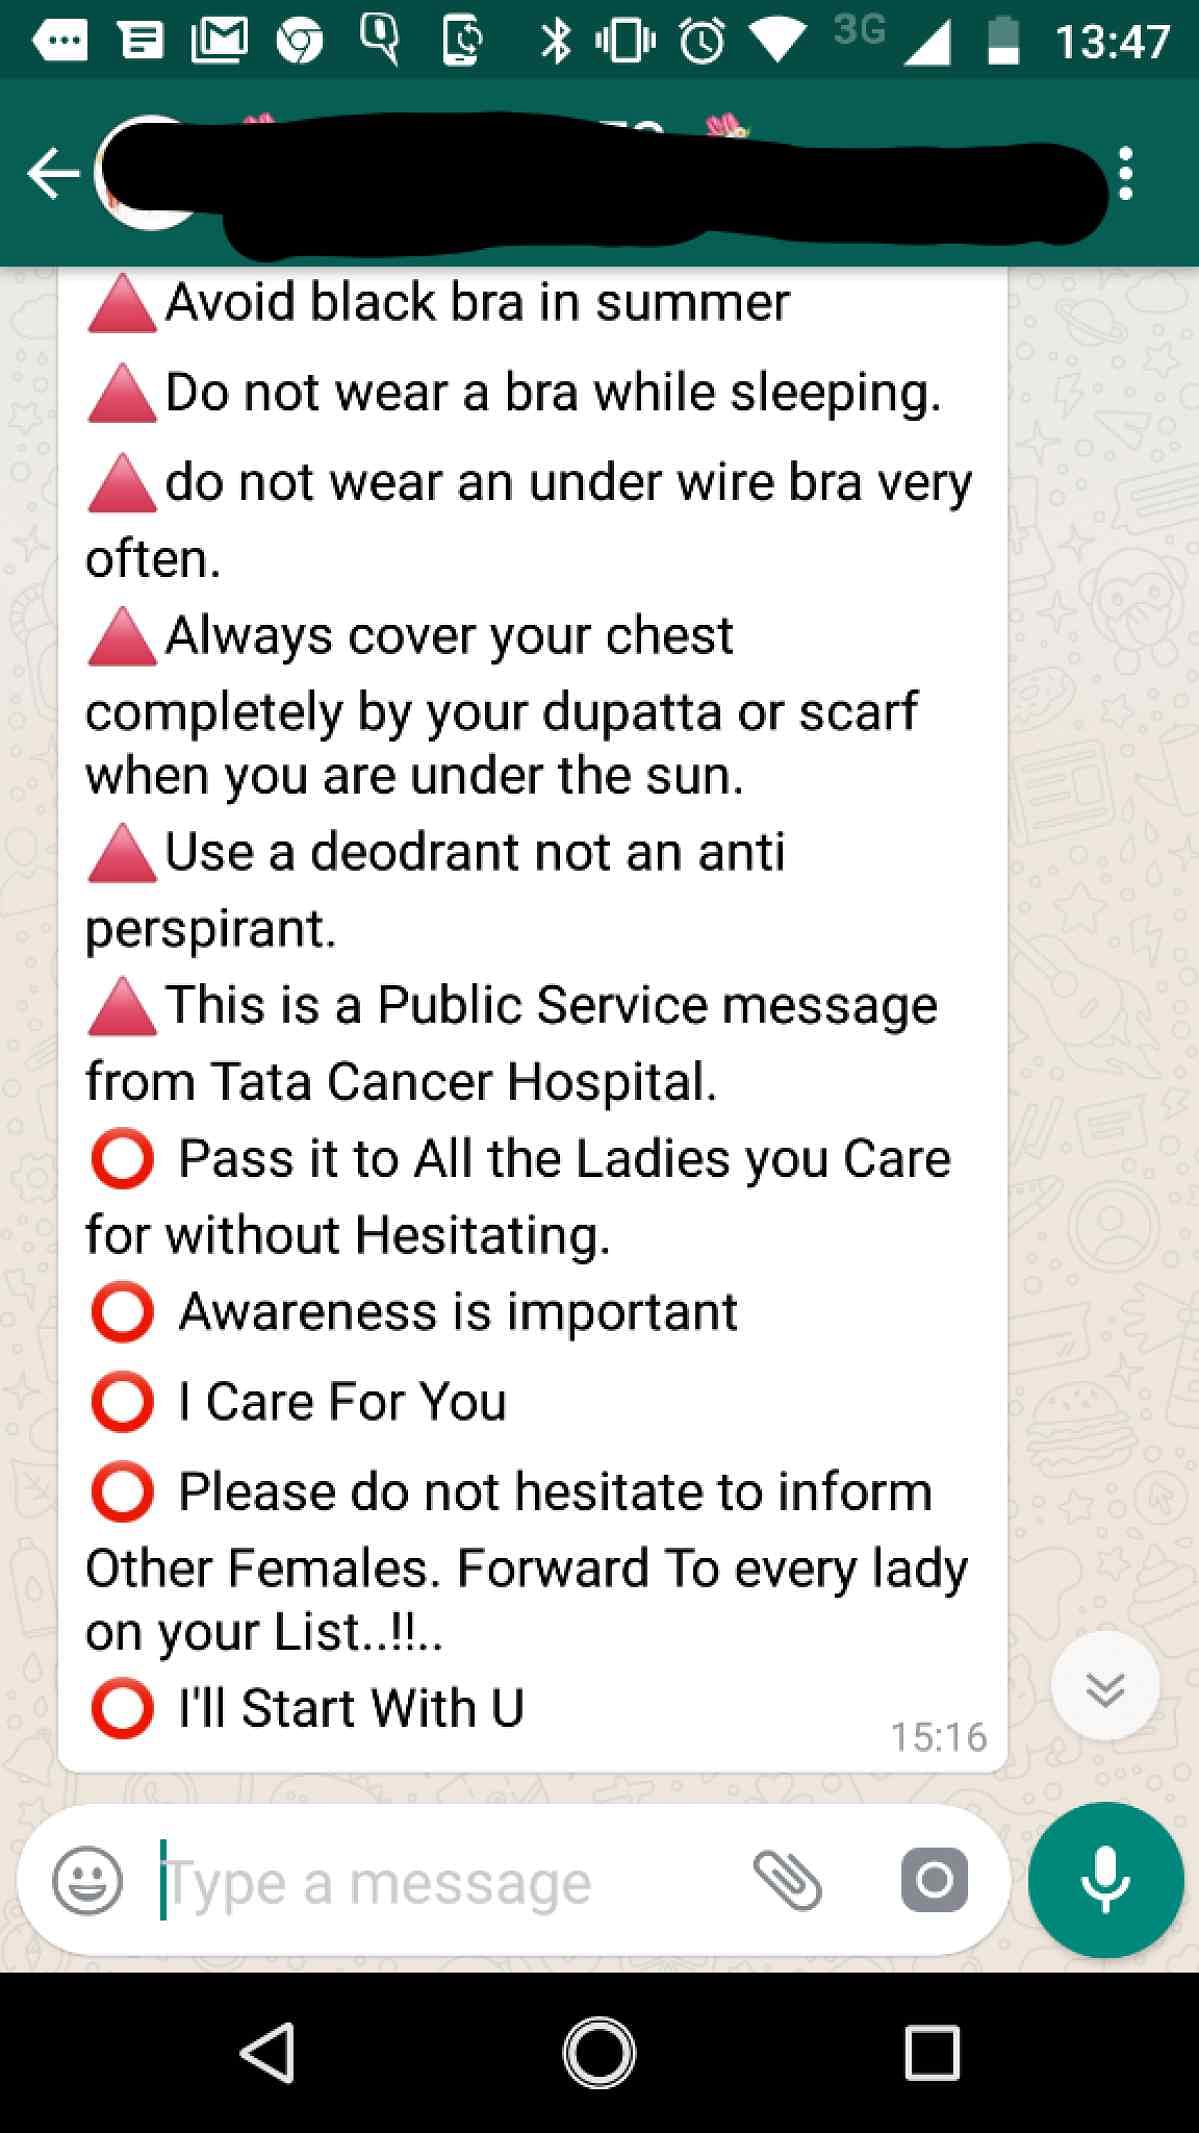 We fact-check a WhatsApp forward giving advice on how to avoid breast cancer.